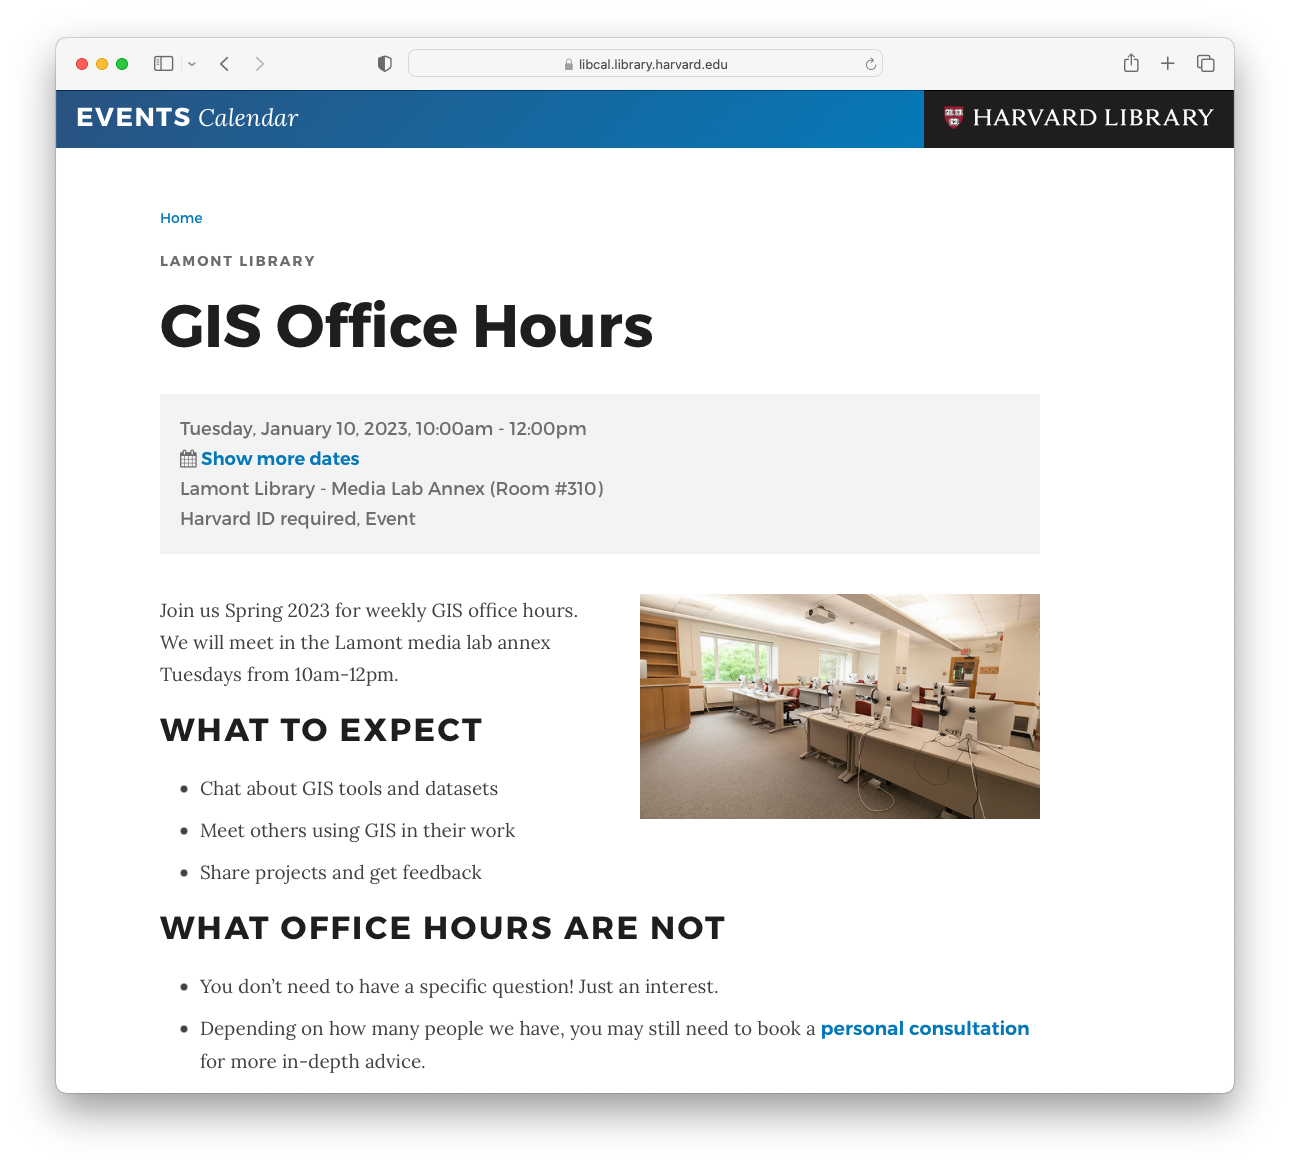 Screenshot of event information for weekly GIS Office hours